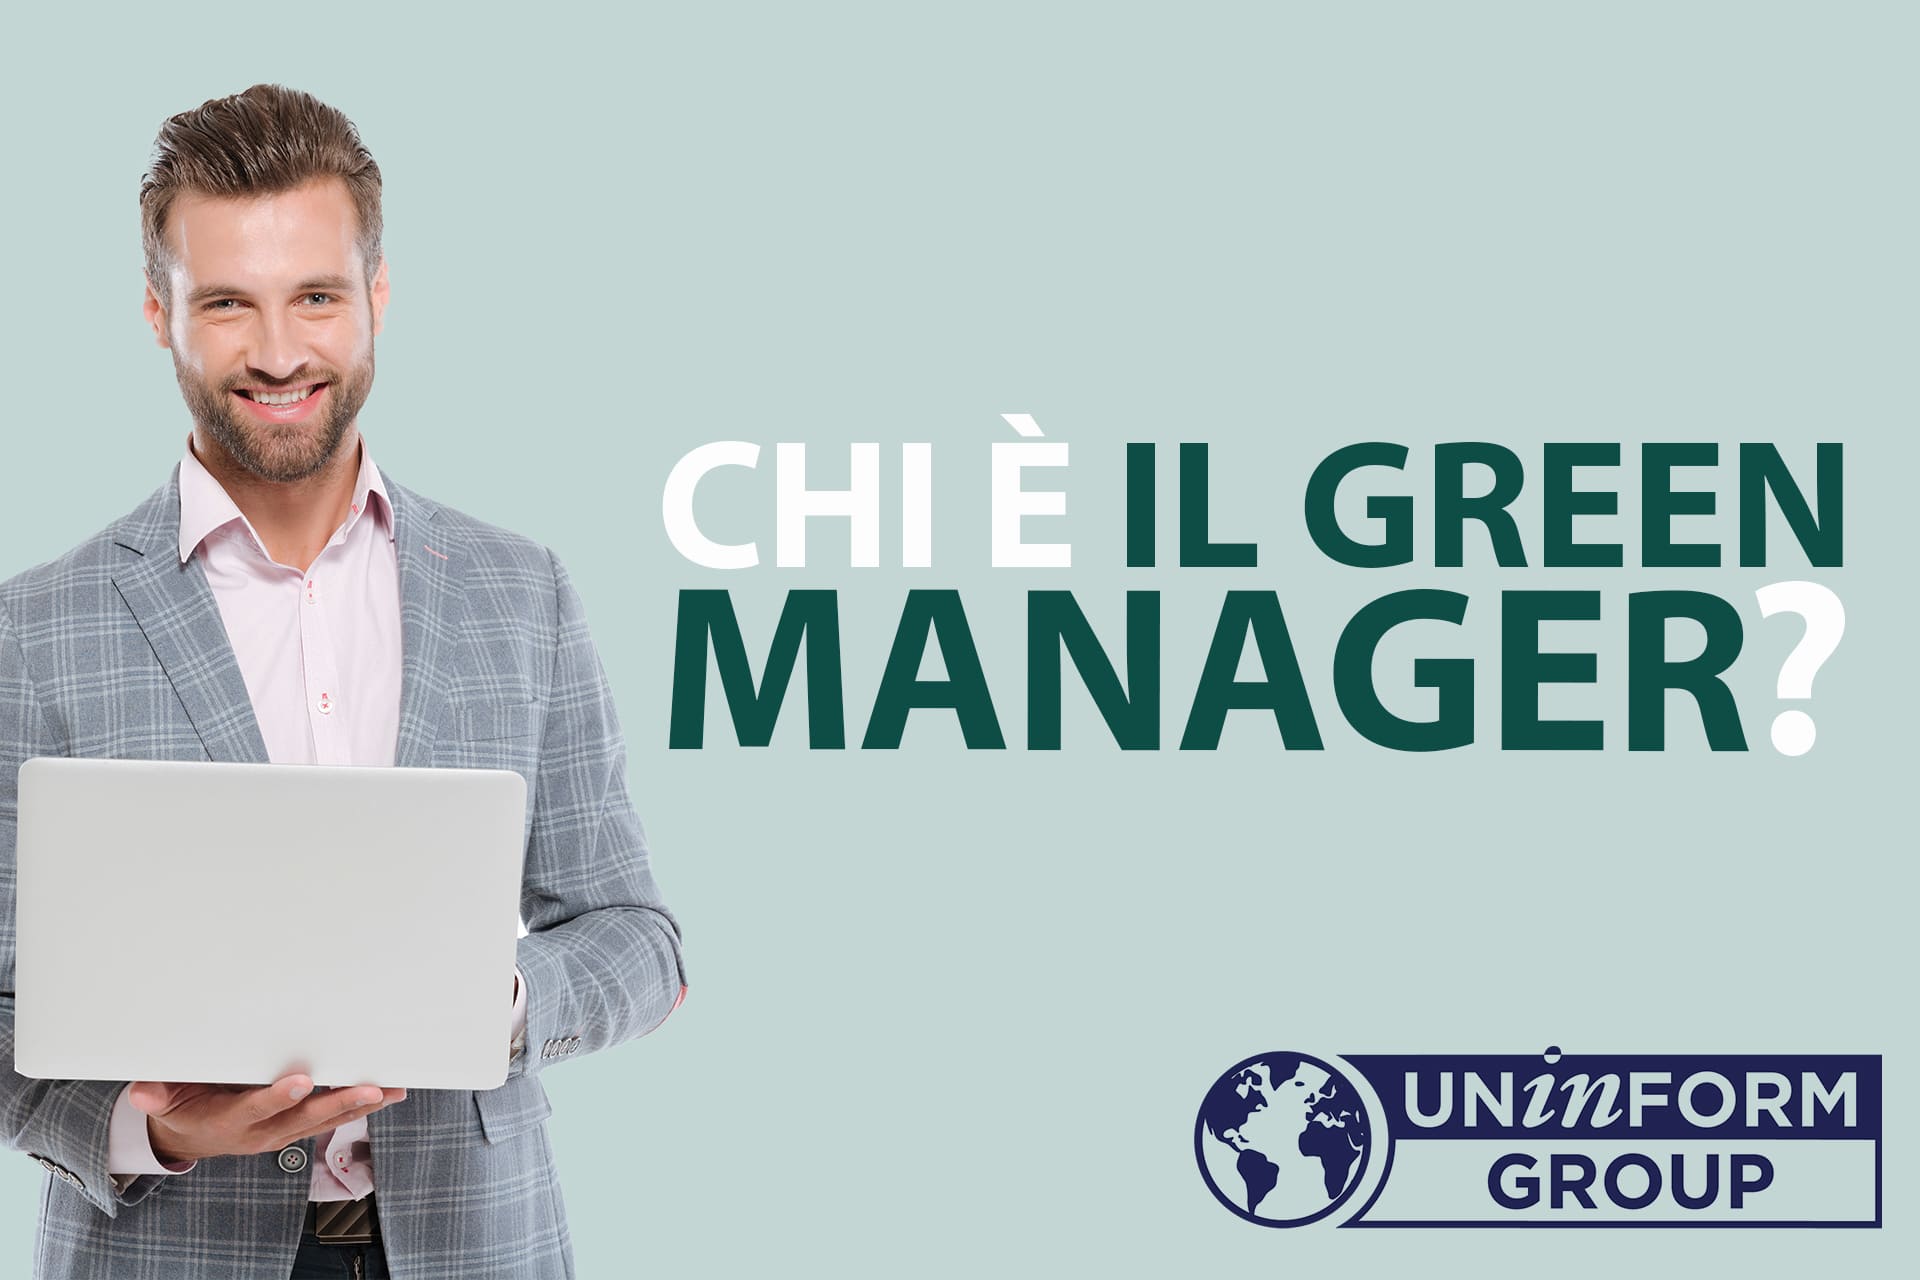 Green Manager